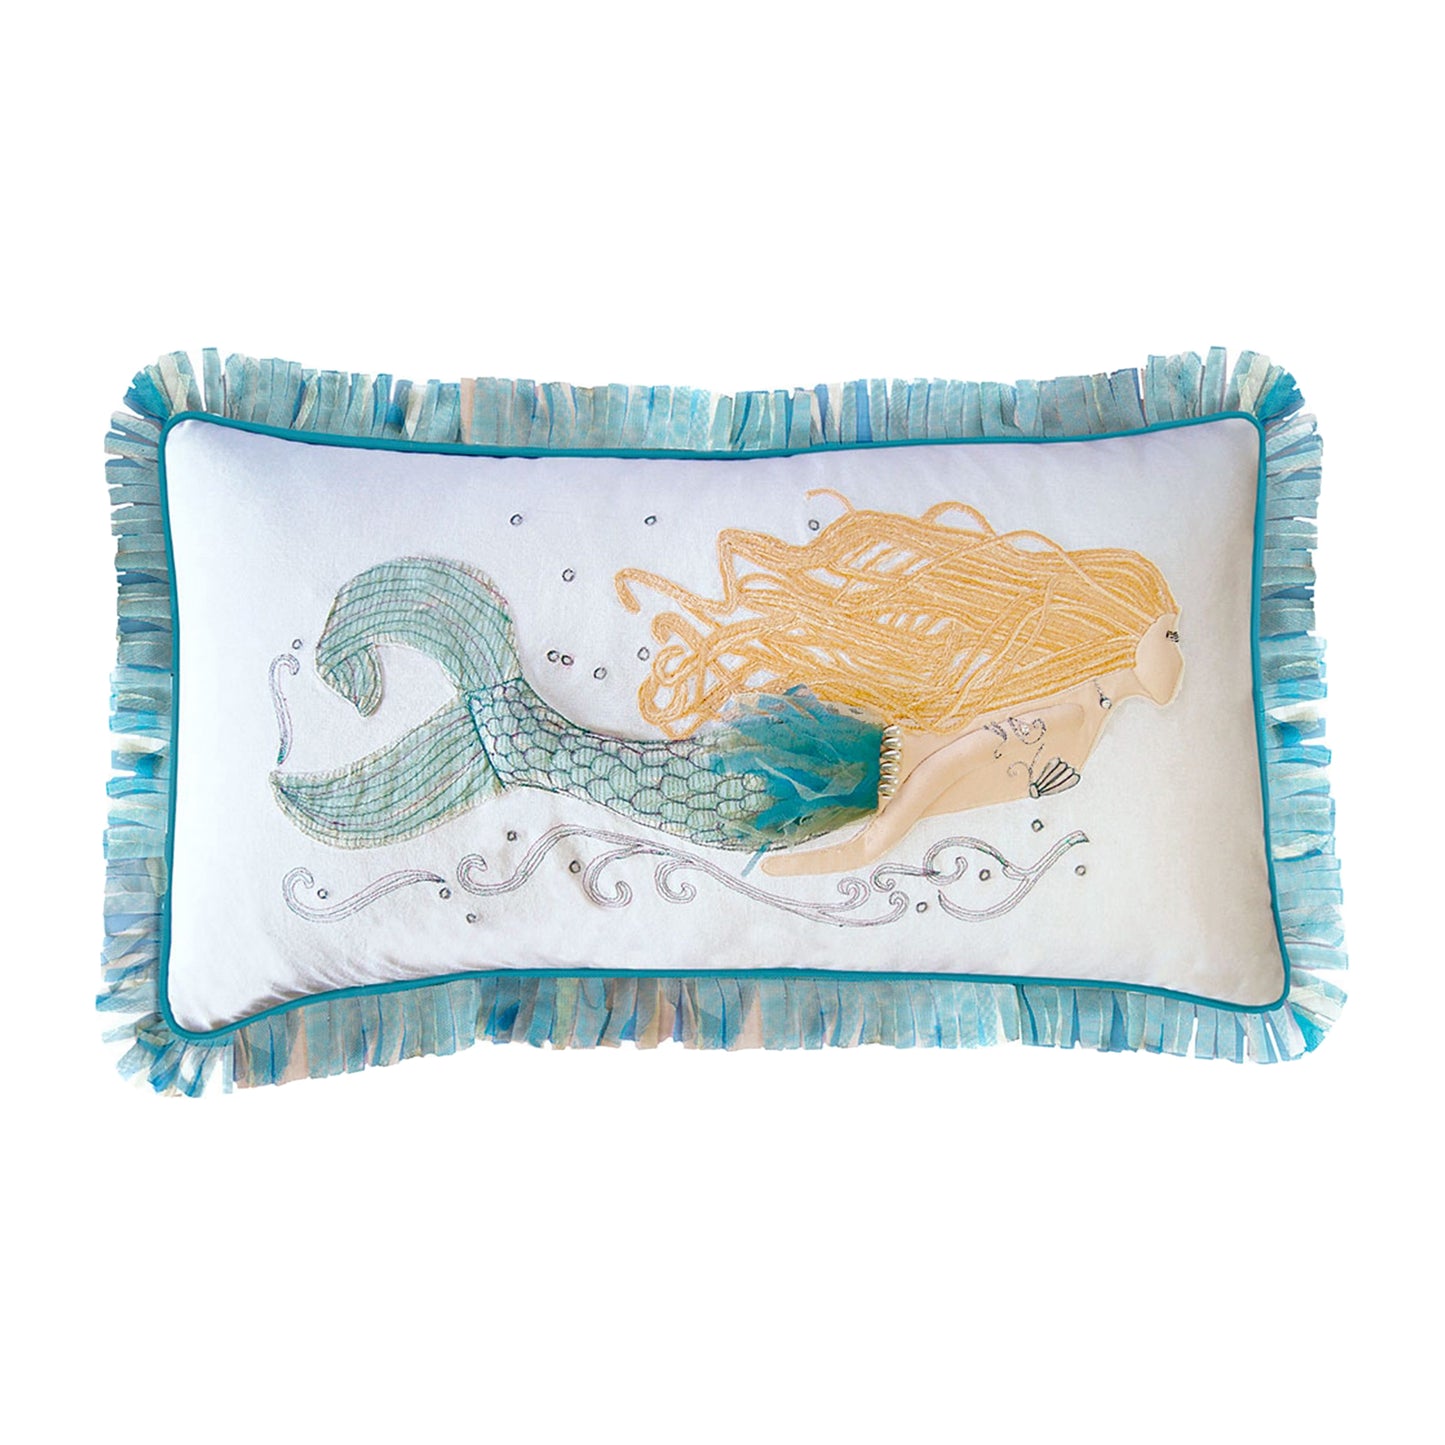 Pearl of the Sea Mermaid pillow features an embroidered, blonde-haired, mermaid with fringed edges.